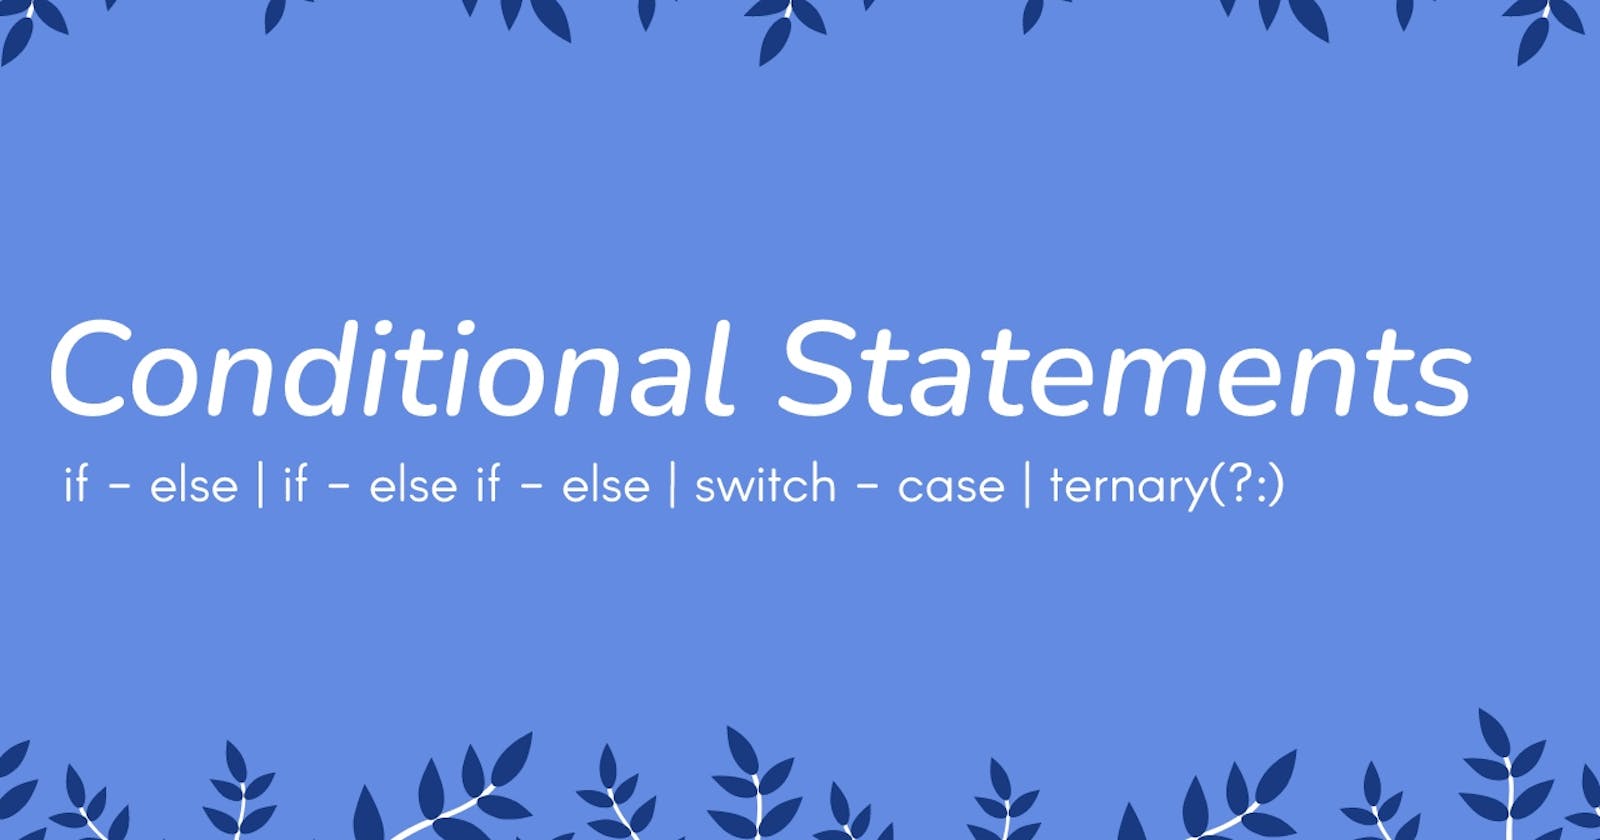 Conditional Statements in Programming - A comprehensive guide.